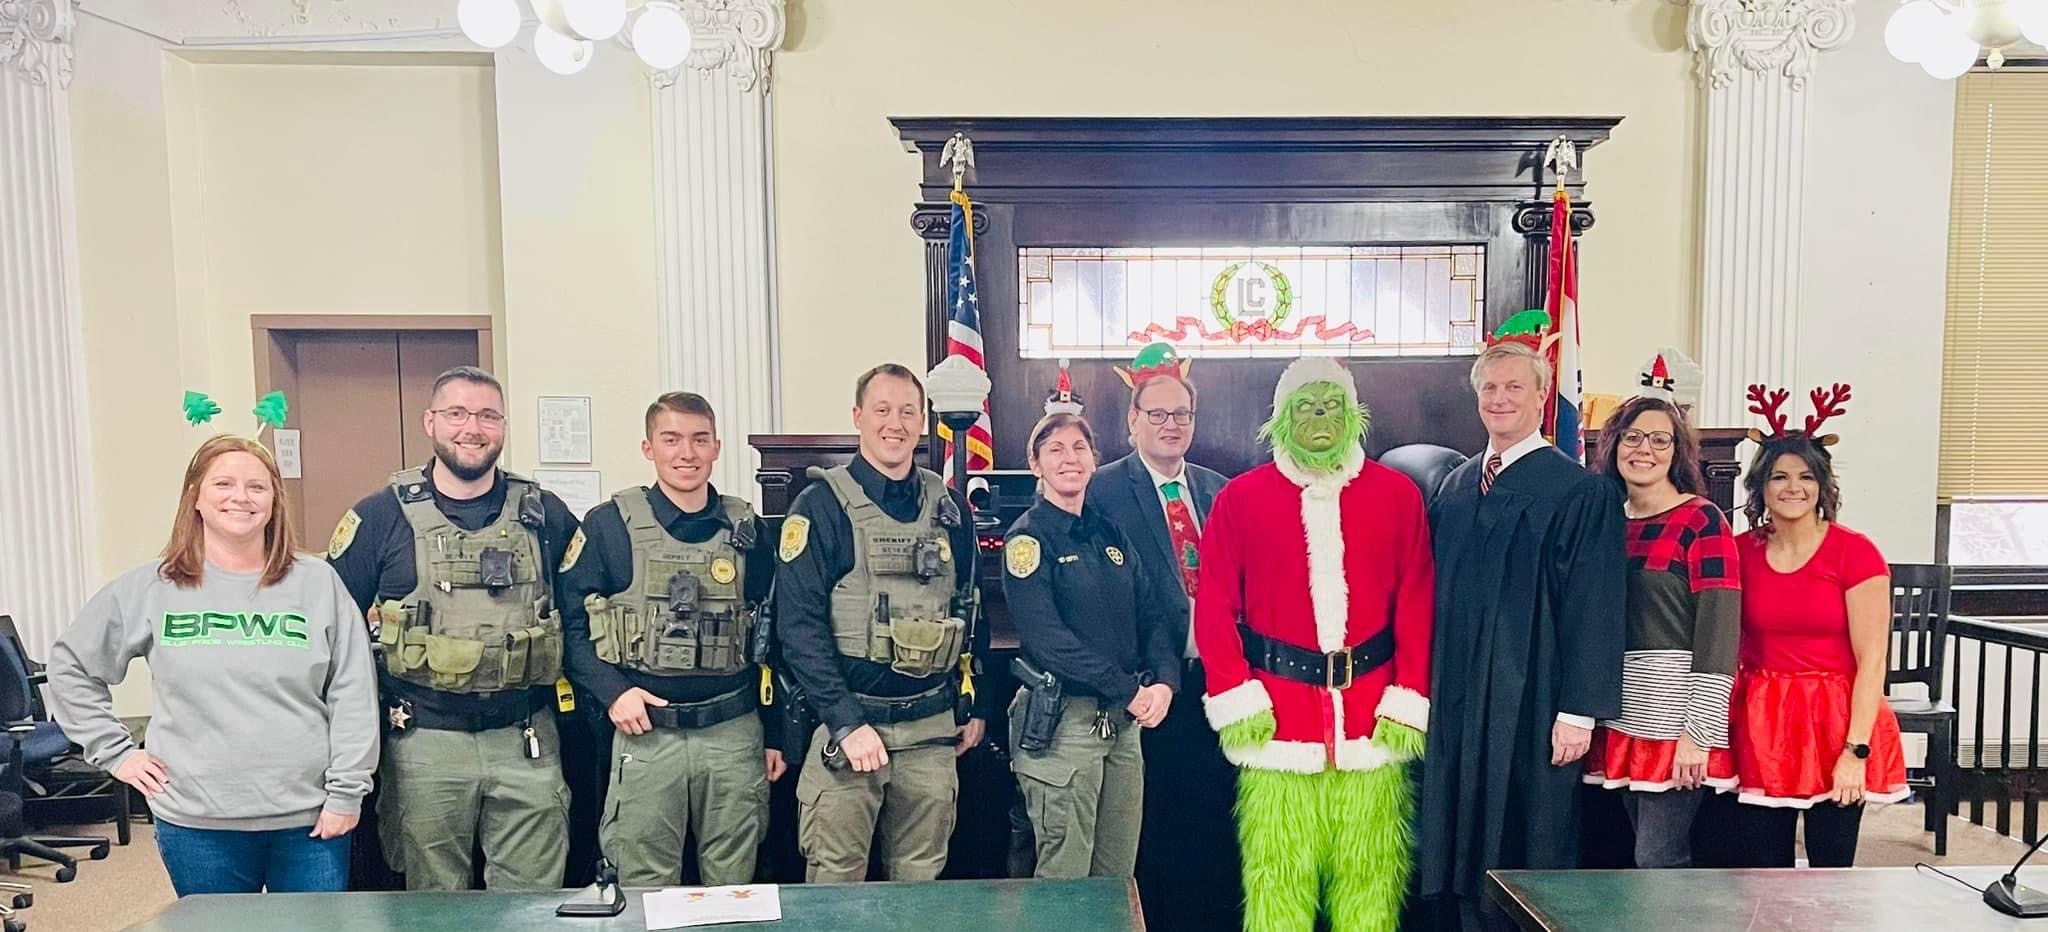 Linn County Staff with the Grinch in the courtroom